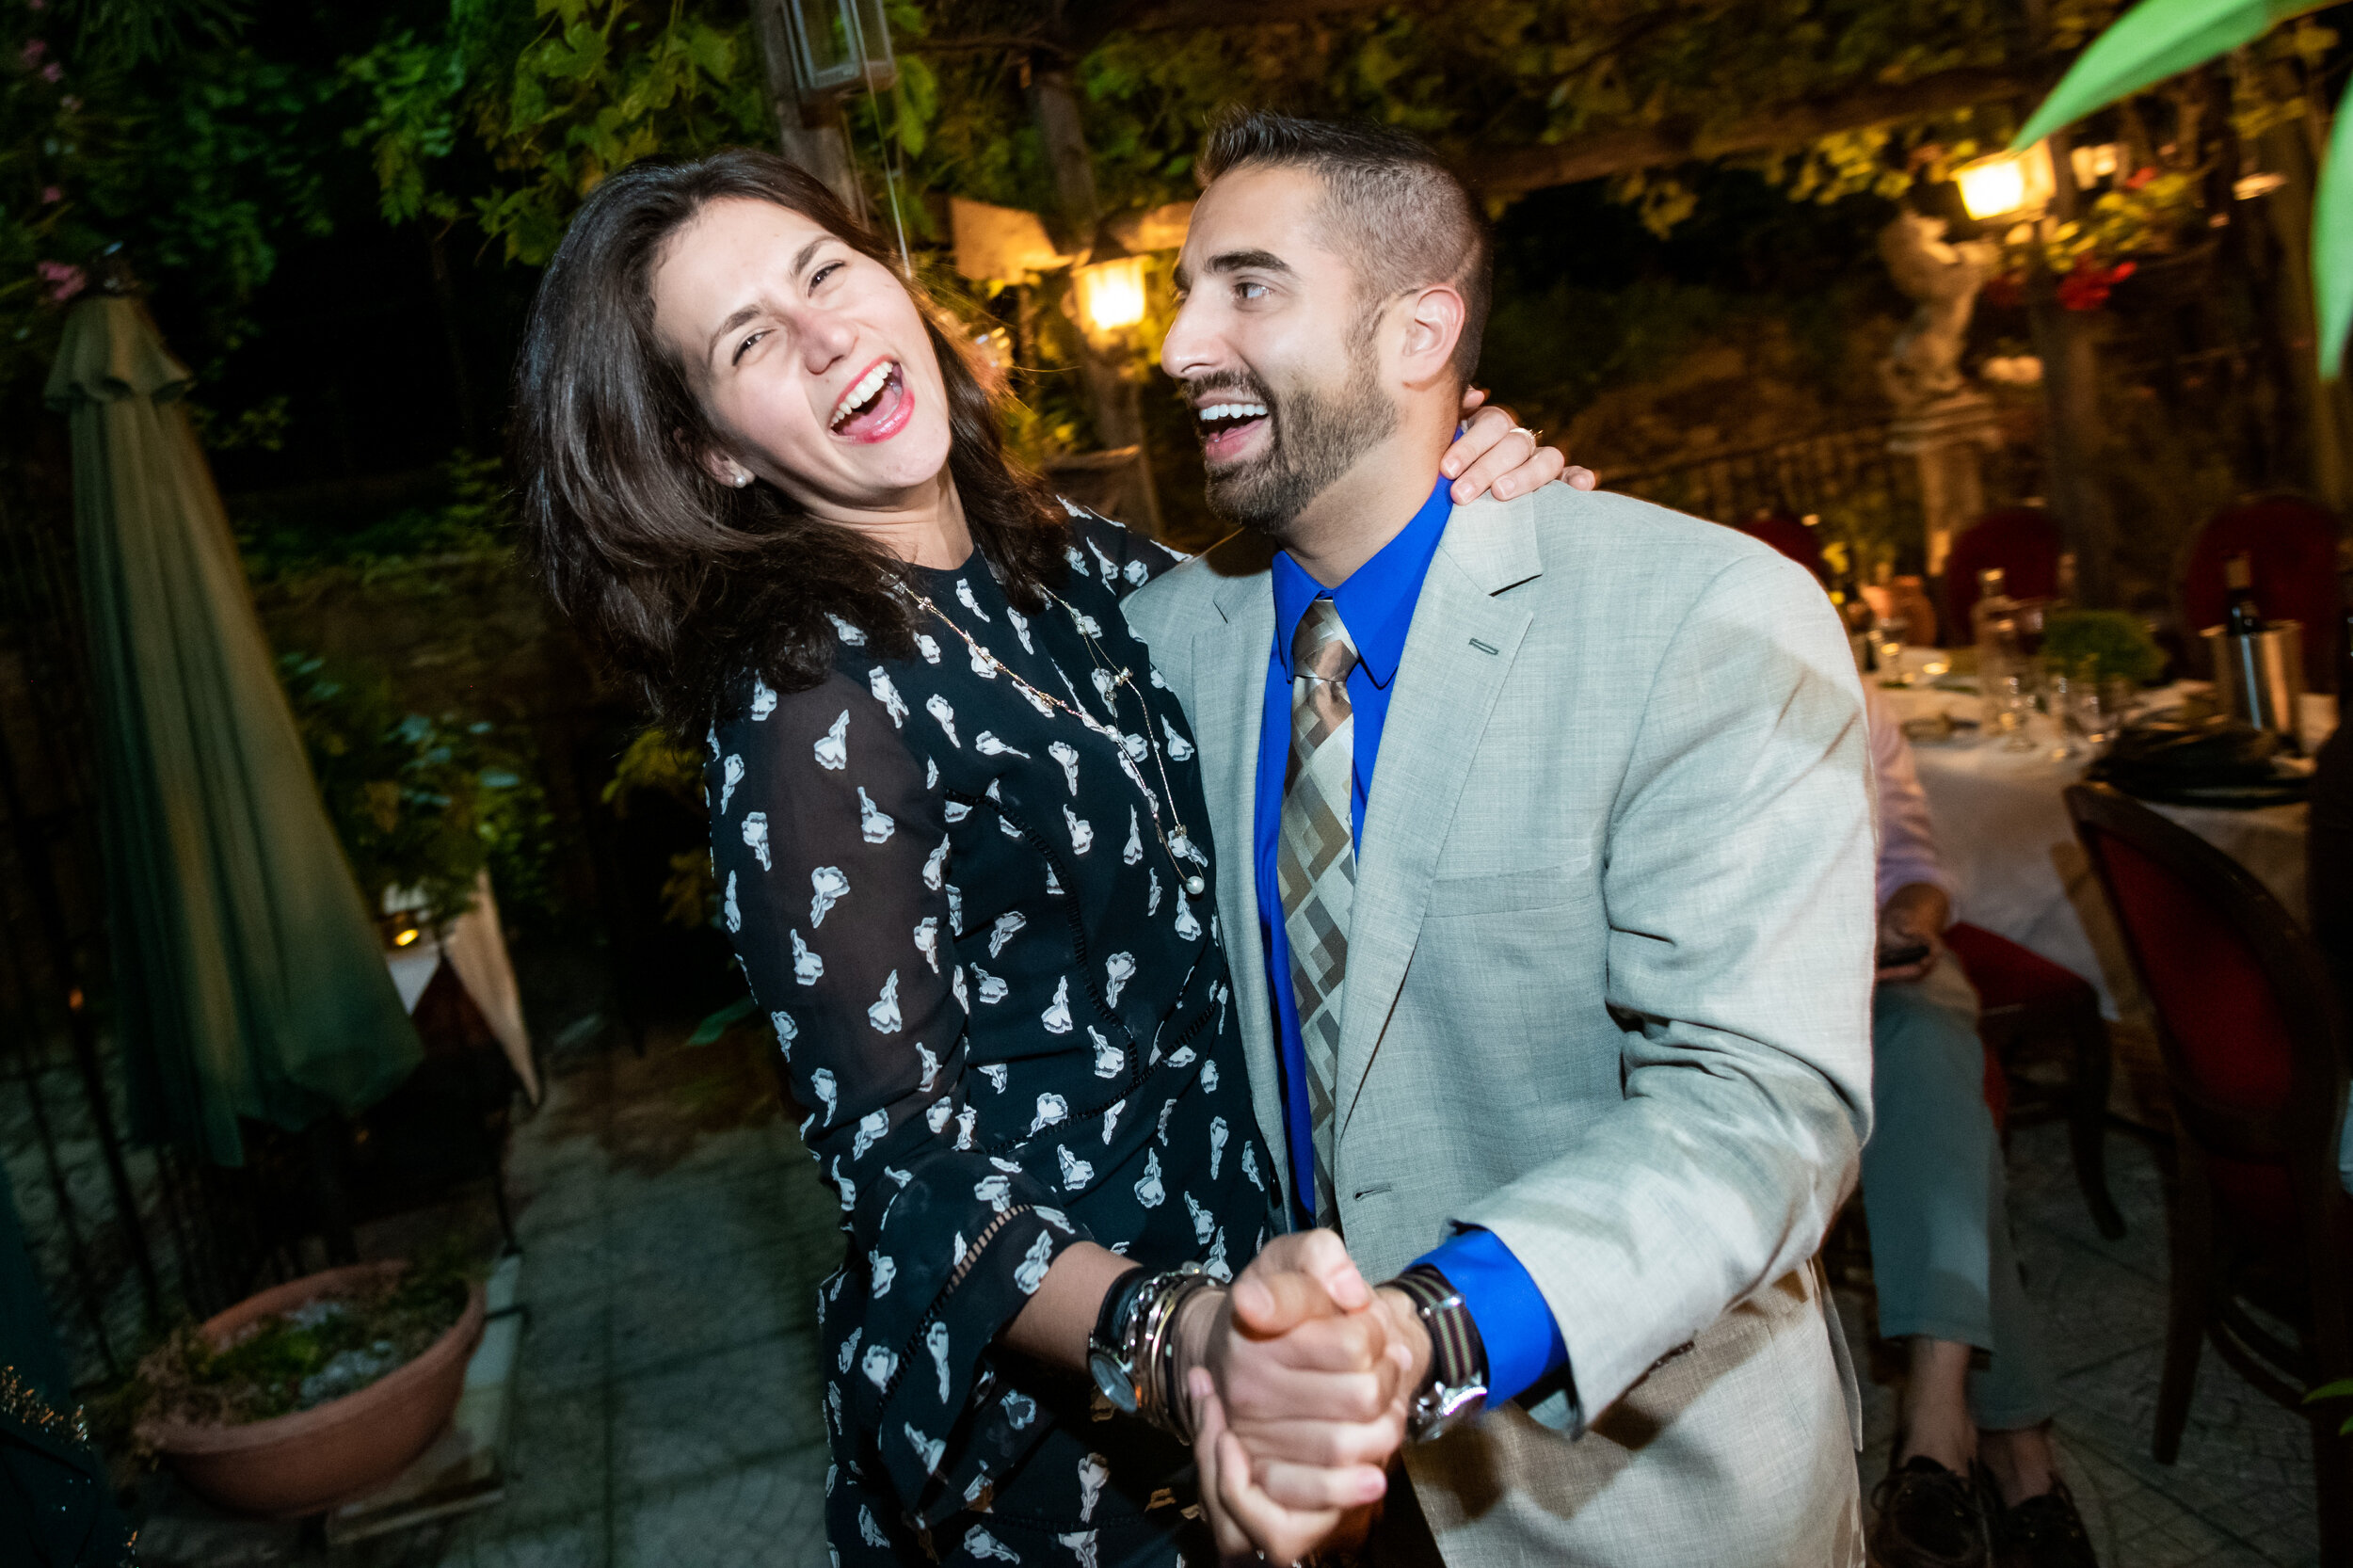 Couple dancing during an outdoor reception:  destination wedding photo at the Lost Unicorn Hotel, Tsagarada, Greece by J. Brown Photography.